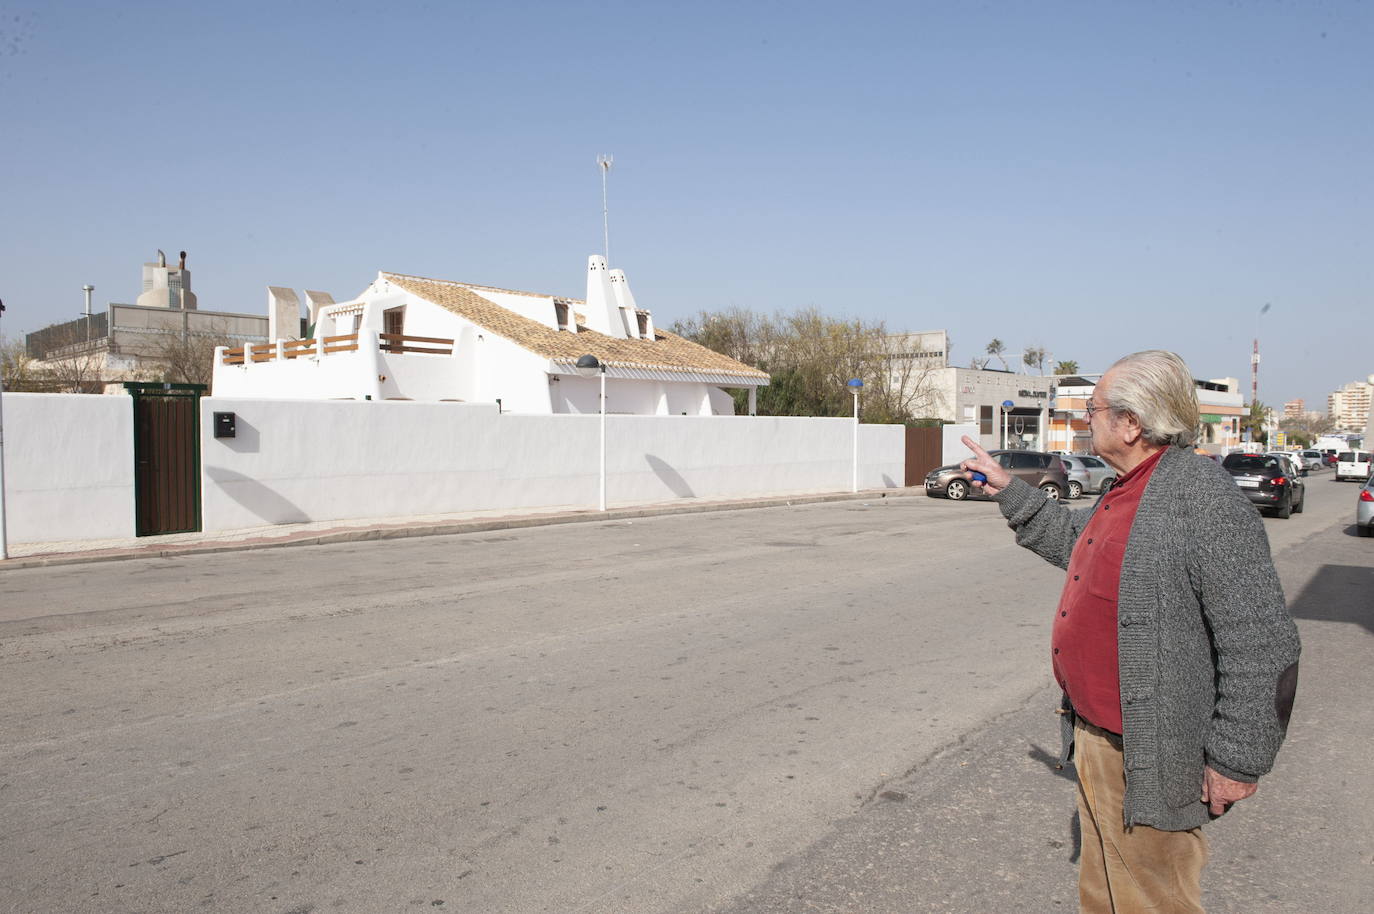 Diego Martínez points to his home, with the bar facilities behind it, in a file photo.